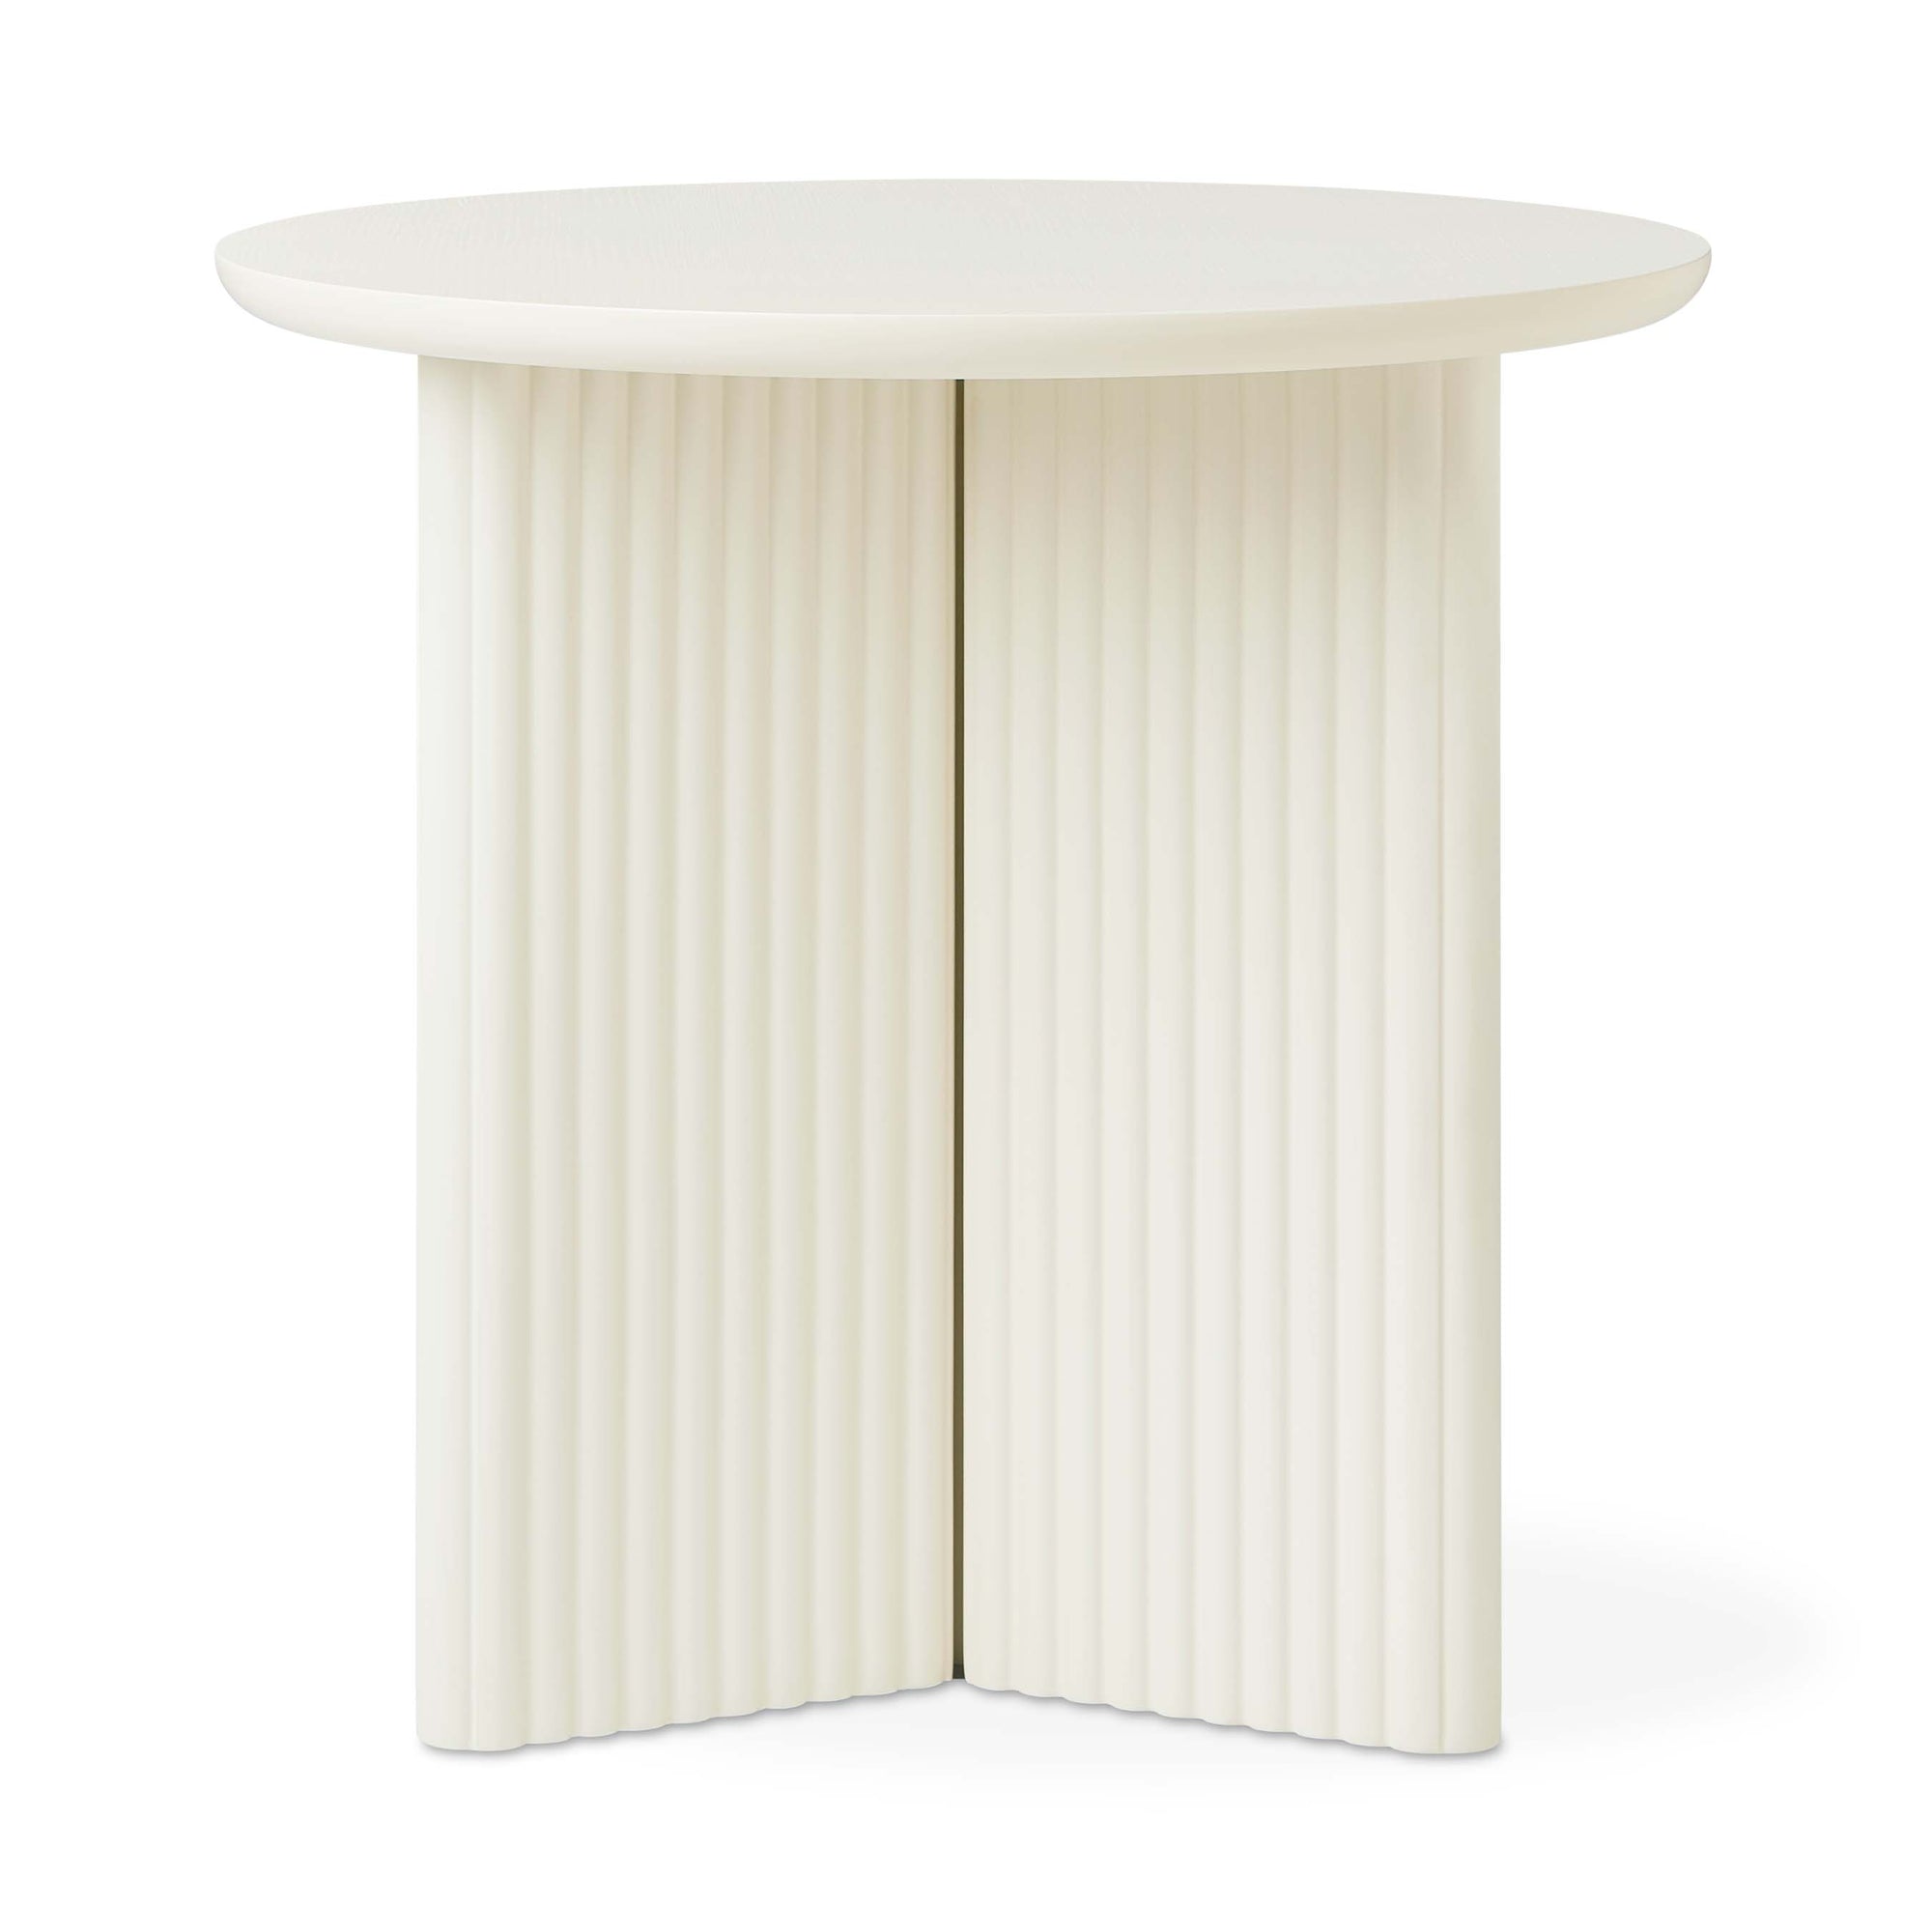 IN STORE - Gus* Modern Odeon End Table - Pearl